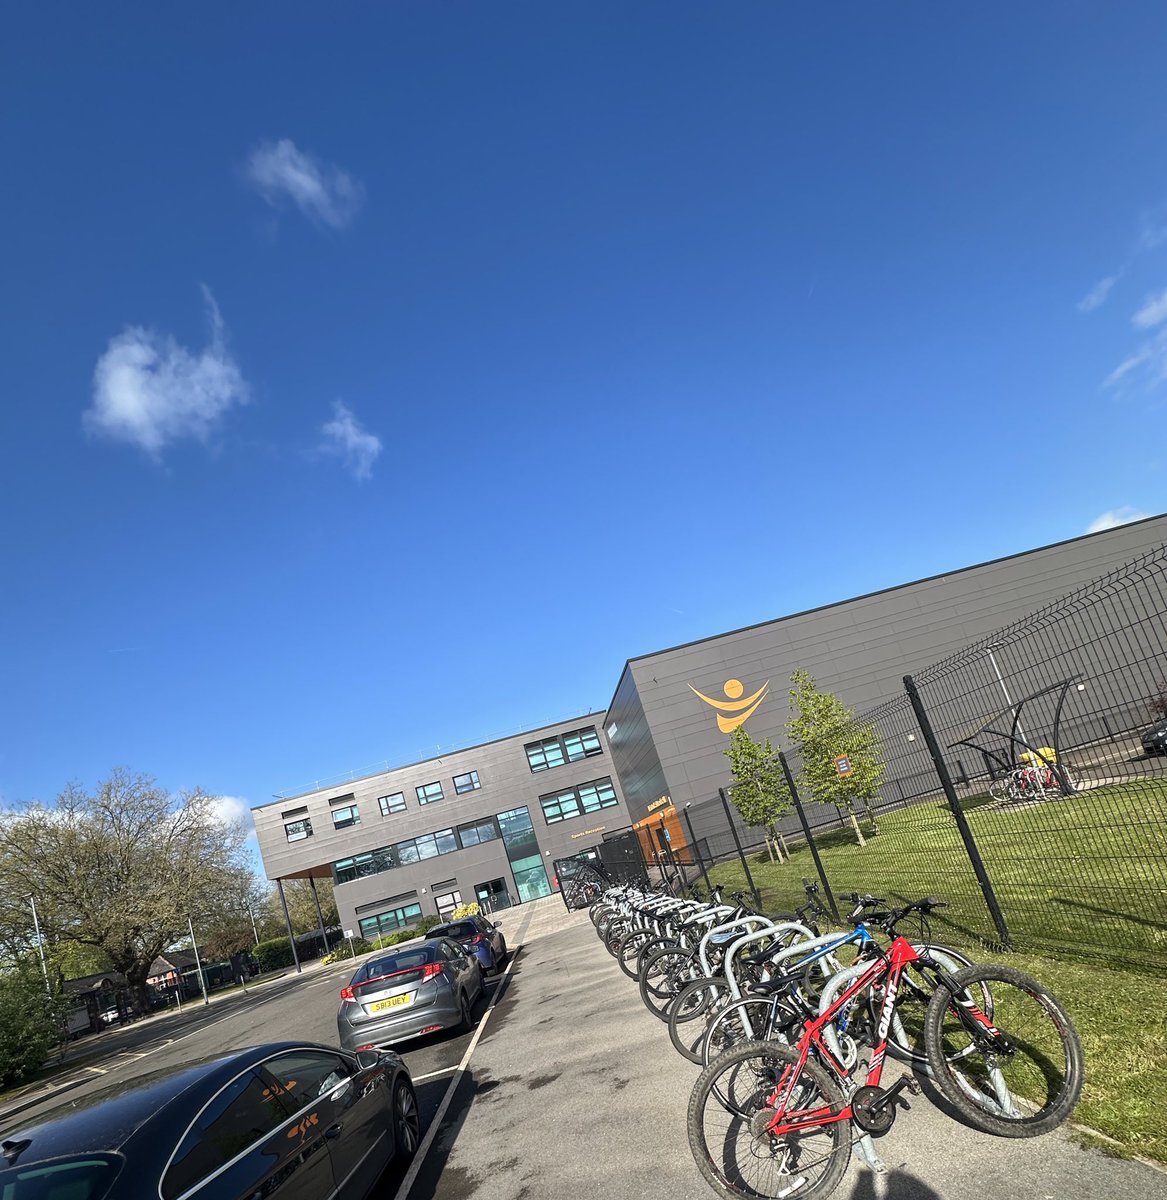 Lovely morning here @MEACentral great to see students making the most of the spring weather and making a healthy choice to cycle 🚲 🧡